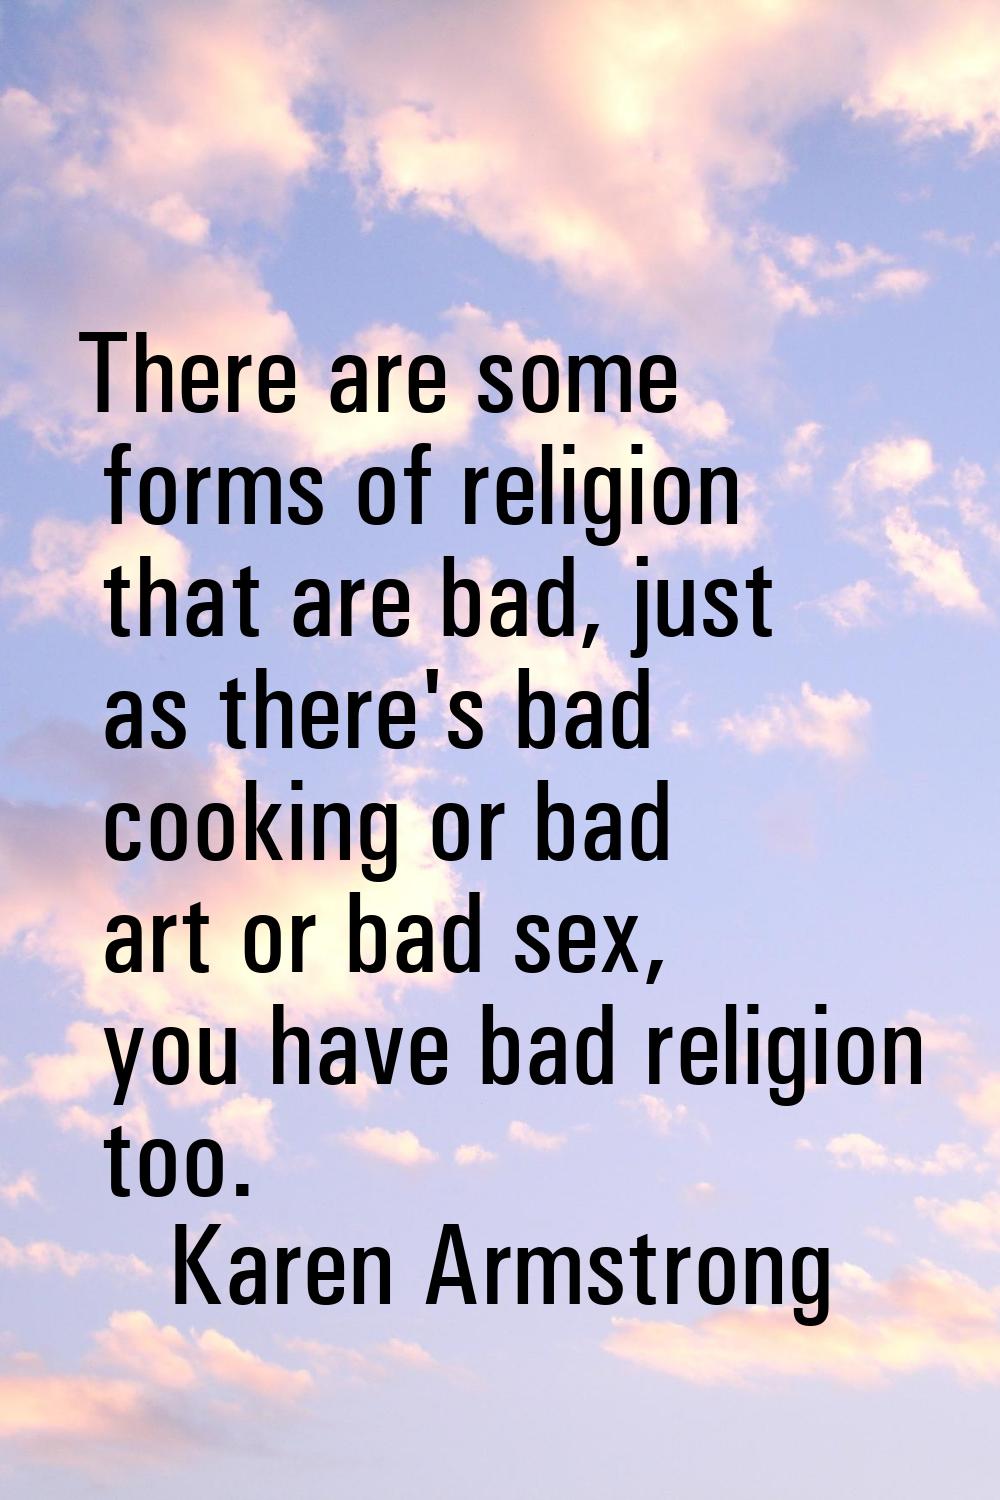 There are some forms of religion that are bad, just as there's bad cooking or bad art or bad sex, y